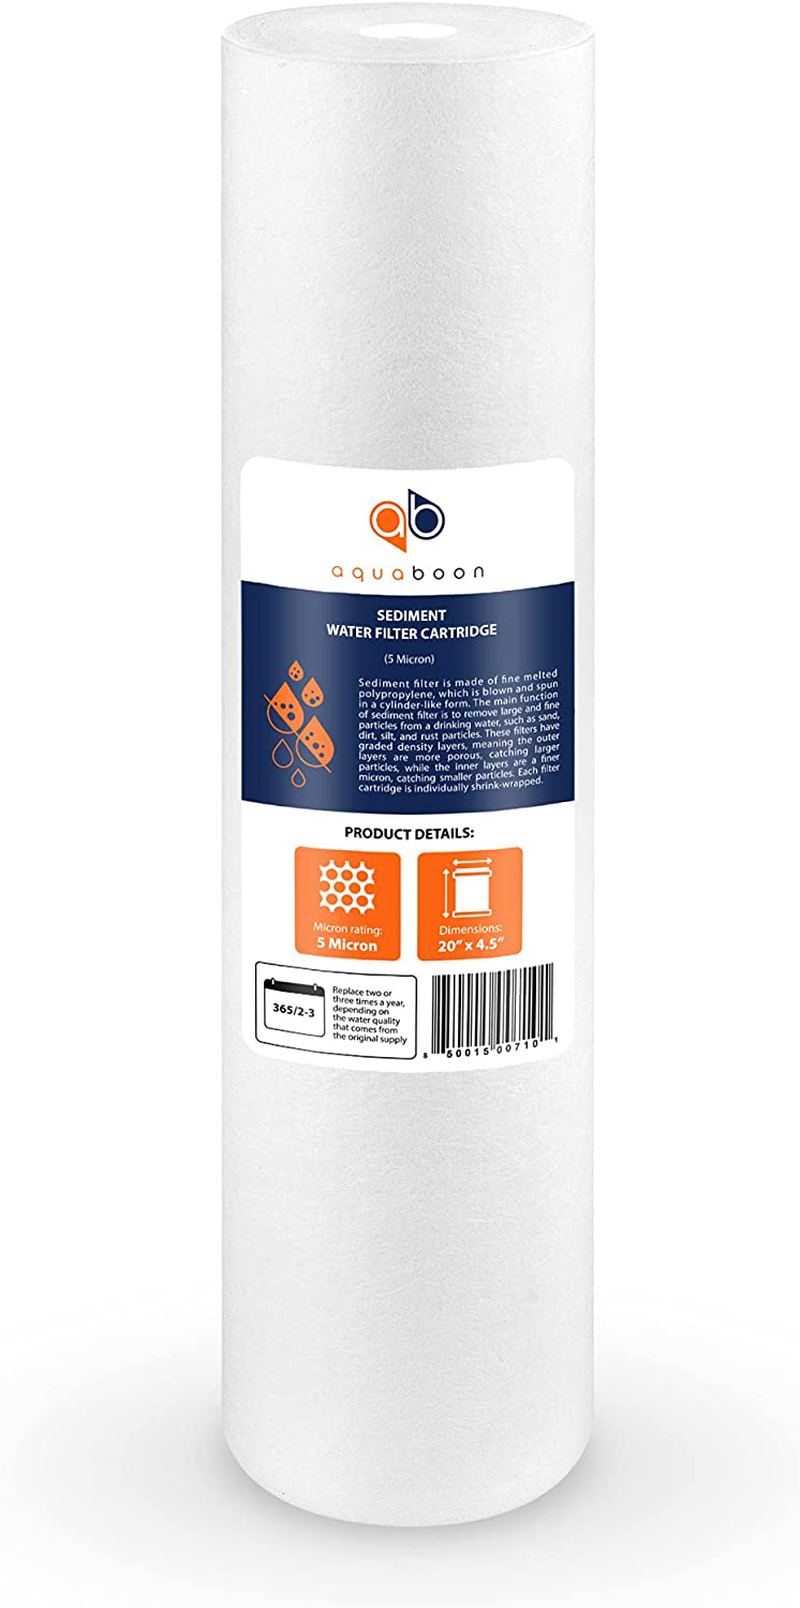 Aquaboon 5 Micron 20" Sediment Water Filter Replacement Cartridge | Whole House Sediment Filtration | Compatible with AP810-2, SDC-45-2005, FPMB5-20, P5-20, FP25B, 155358-43, 2 Pack